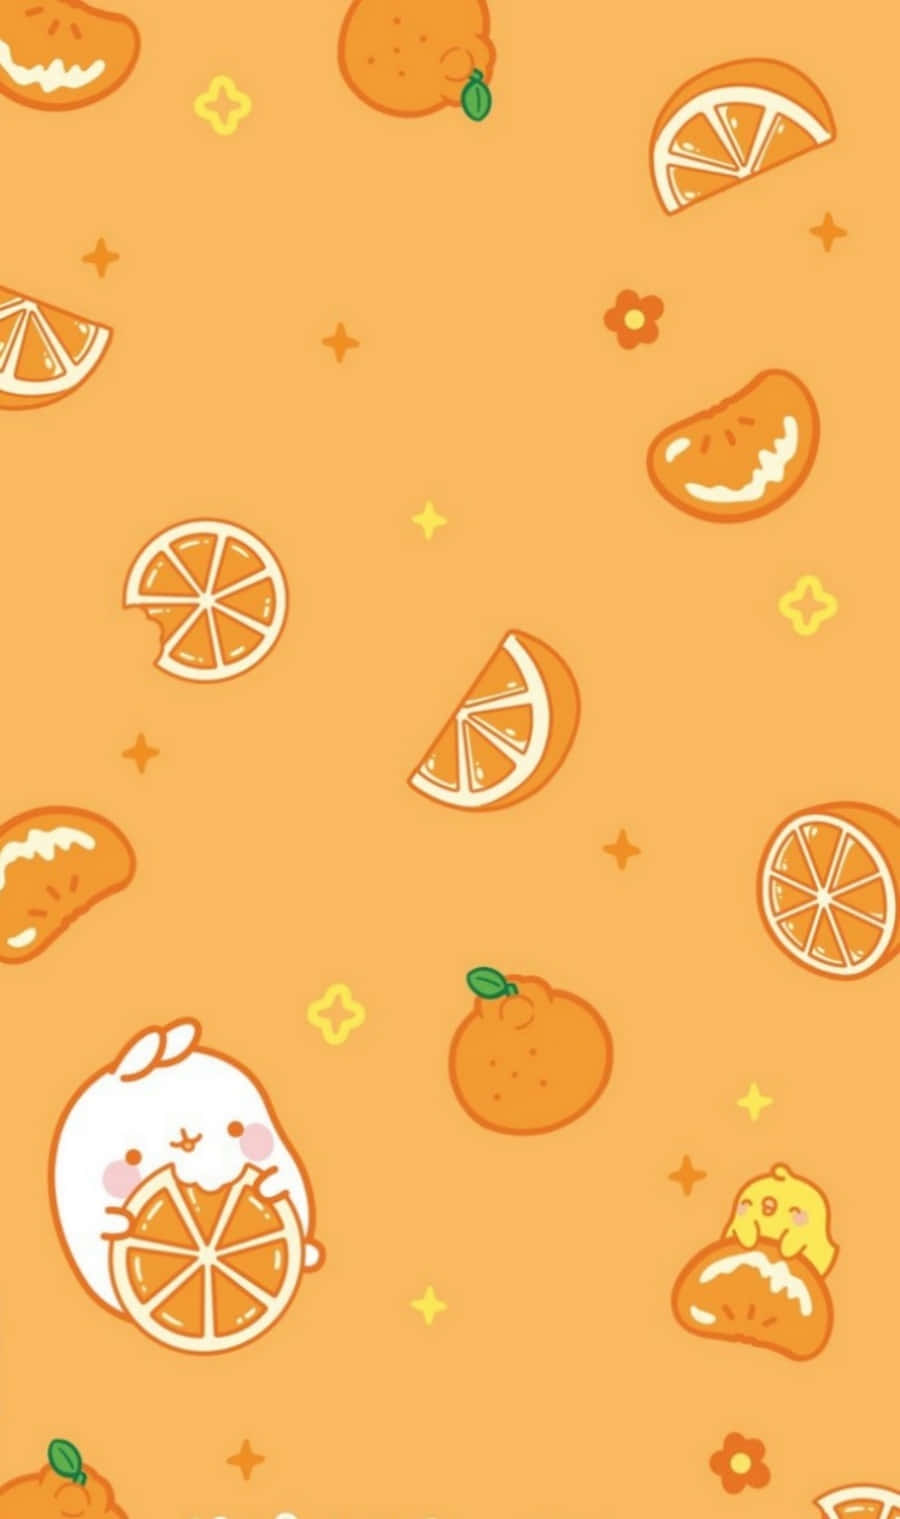 Cute Orange Fruits And Slices Background